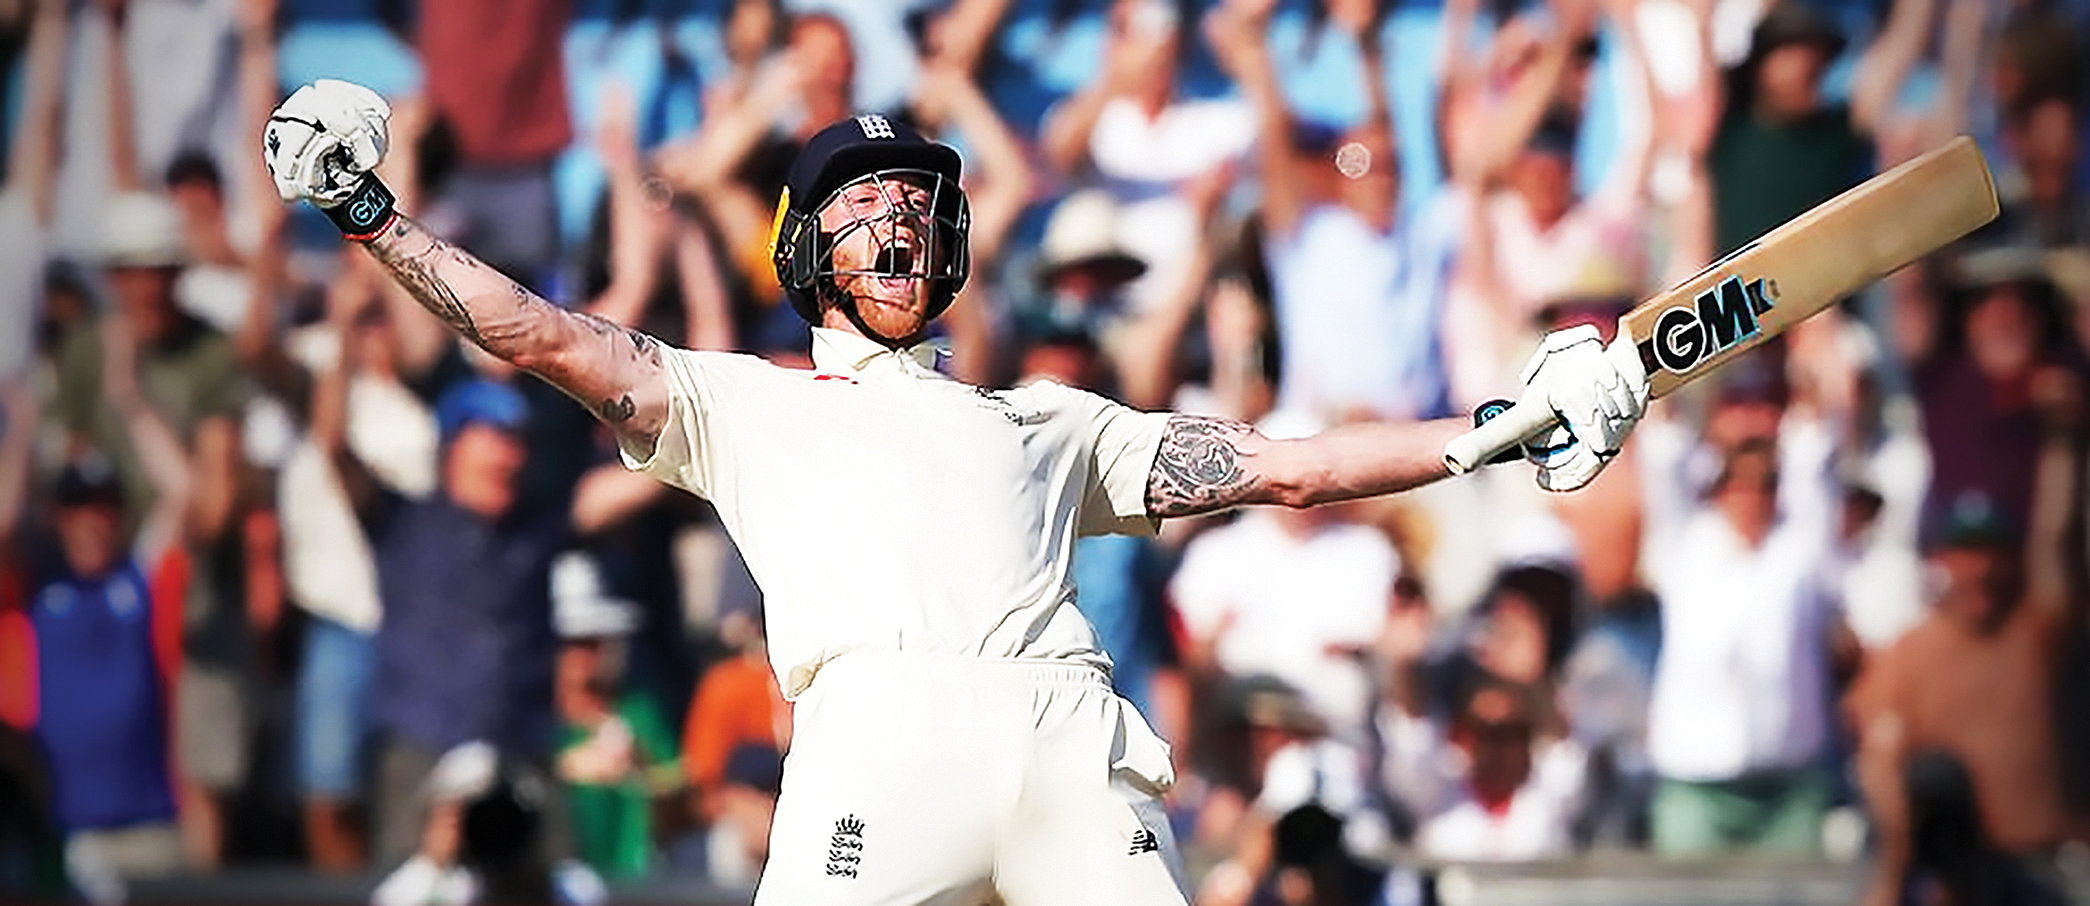 Presenting BBC’s best player of 2019 – Ben Stokes